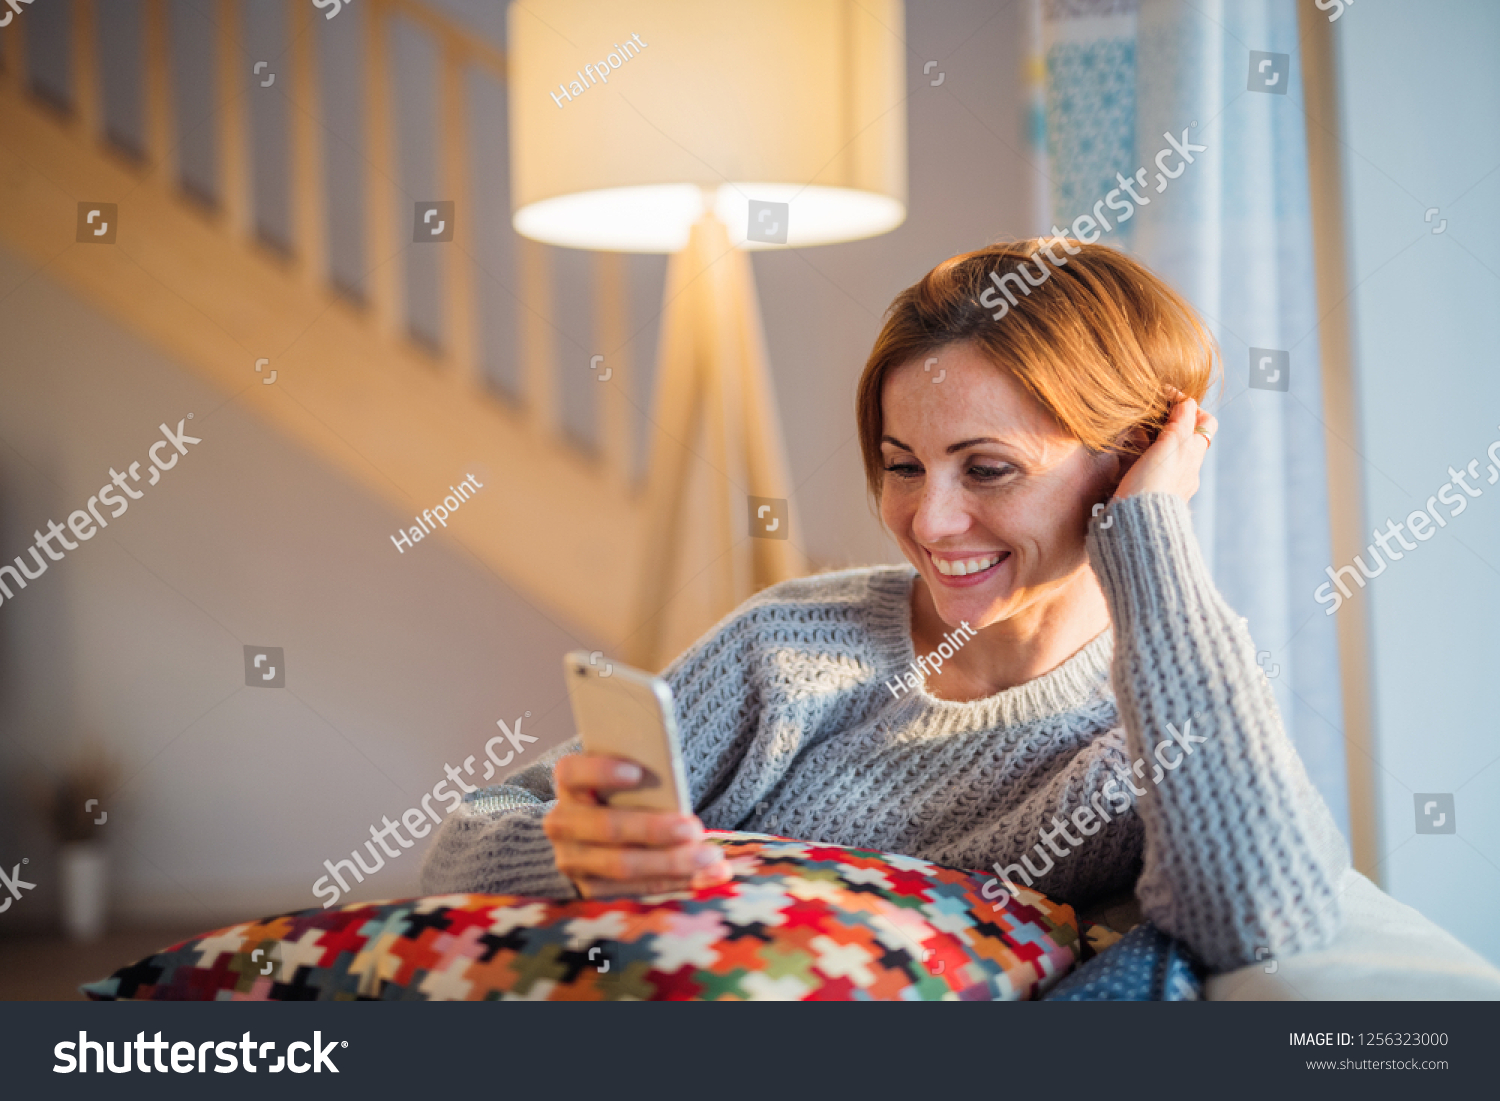 A young woman sitting indoors on a sofa at home, using smartphone. #1256323000